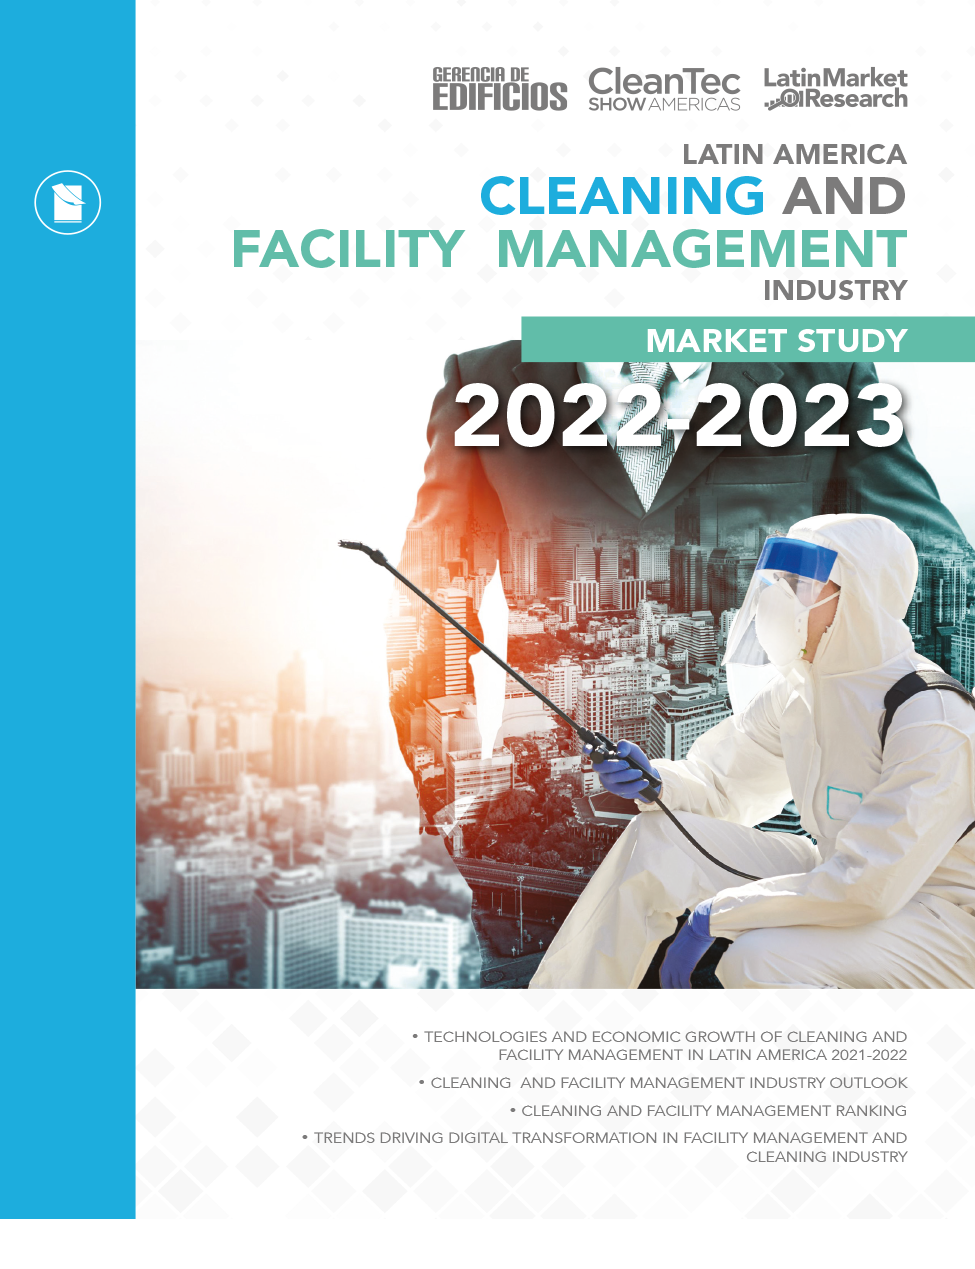 LATIN AMERICA CLEANING AND FACILITY MANAGEMENT INDUSTRY MARKET STUDY 2022